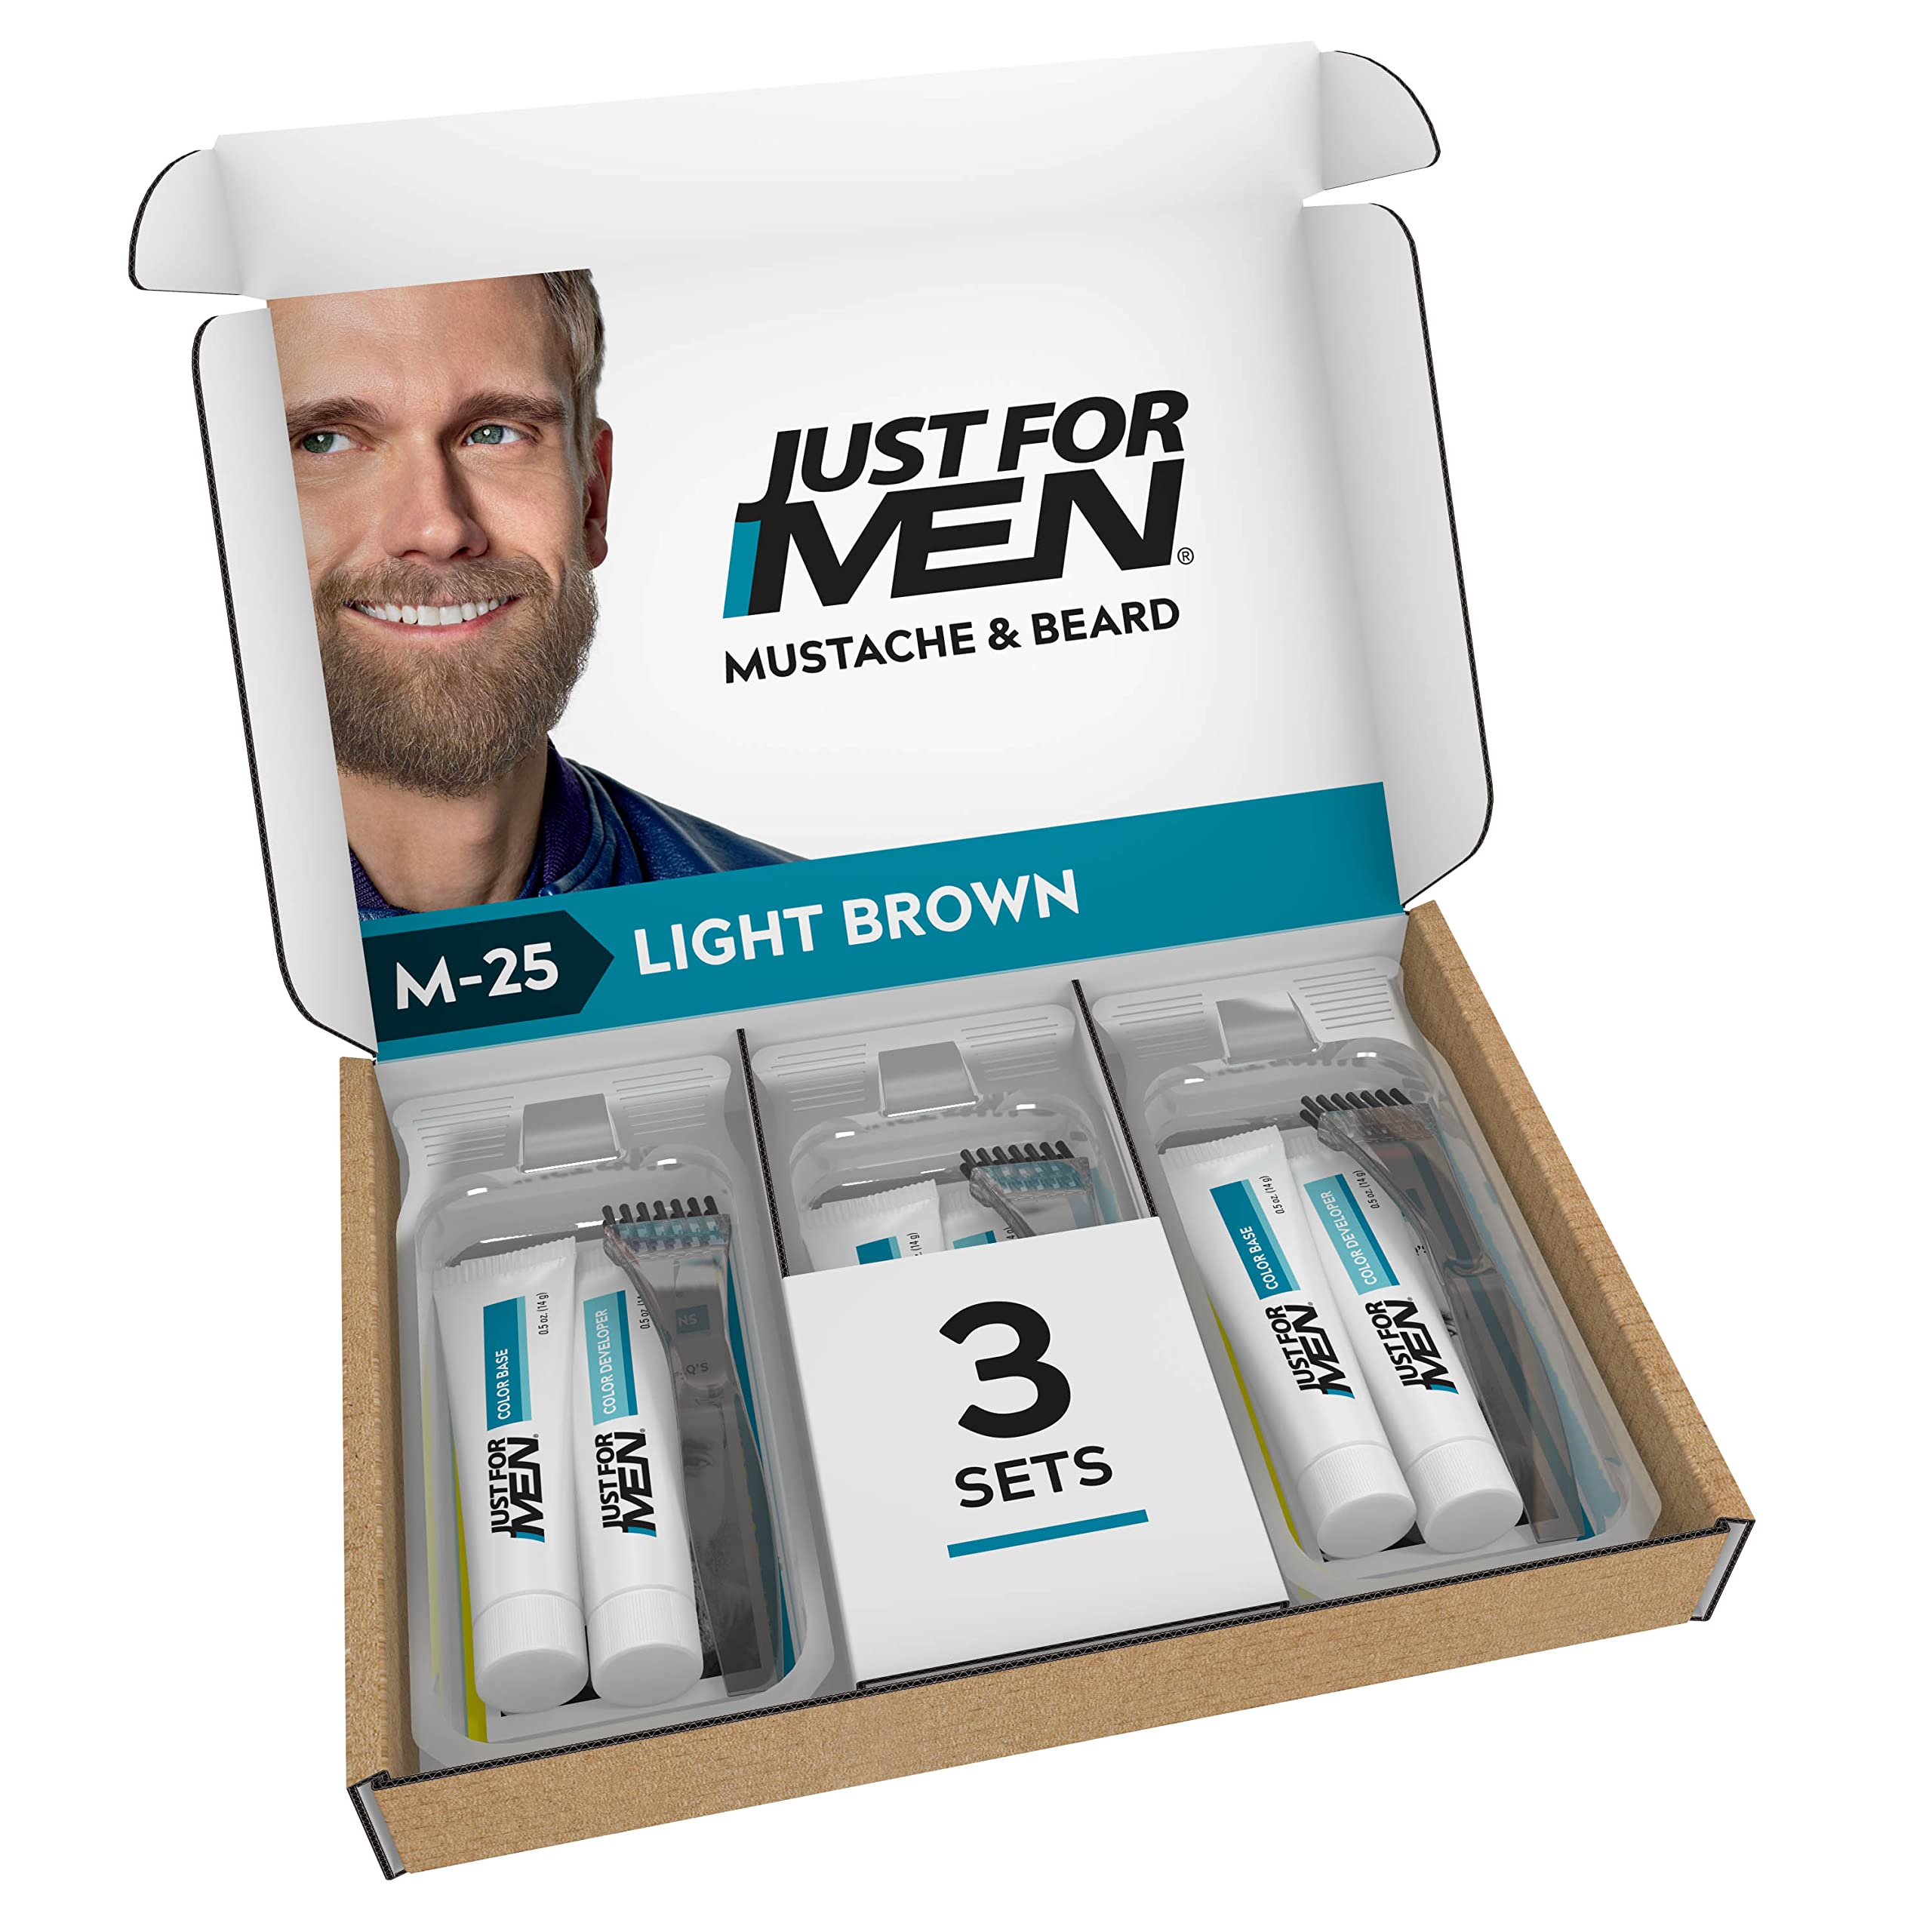 Just For Men Mustache & Beard, Beard Coloring for Gray Hair, with Biotin Aloe and Coconut Oil for Healthy Facial Hair - Light Brown, M-25 (Pack of 3, Ecomm Friendly Packaging)